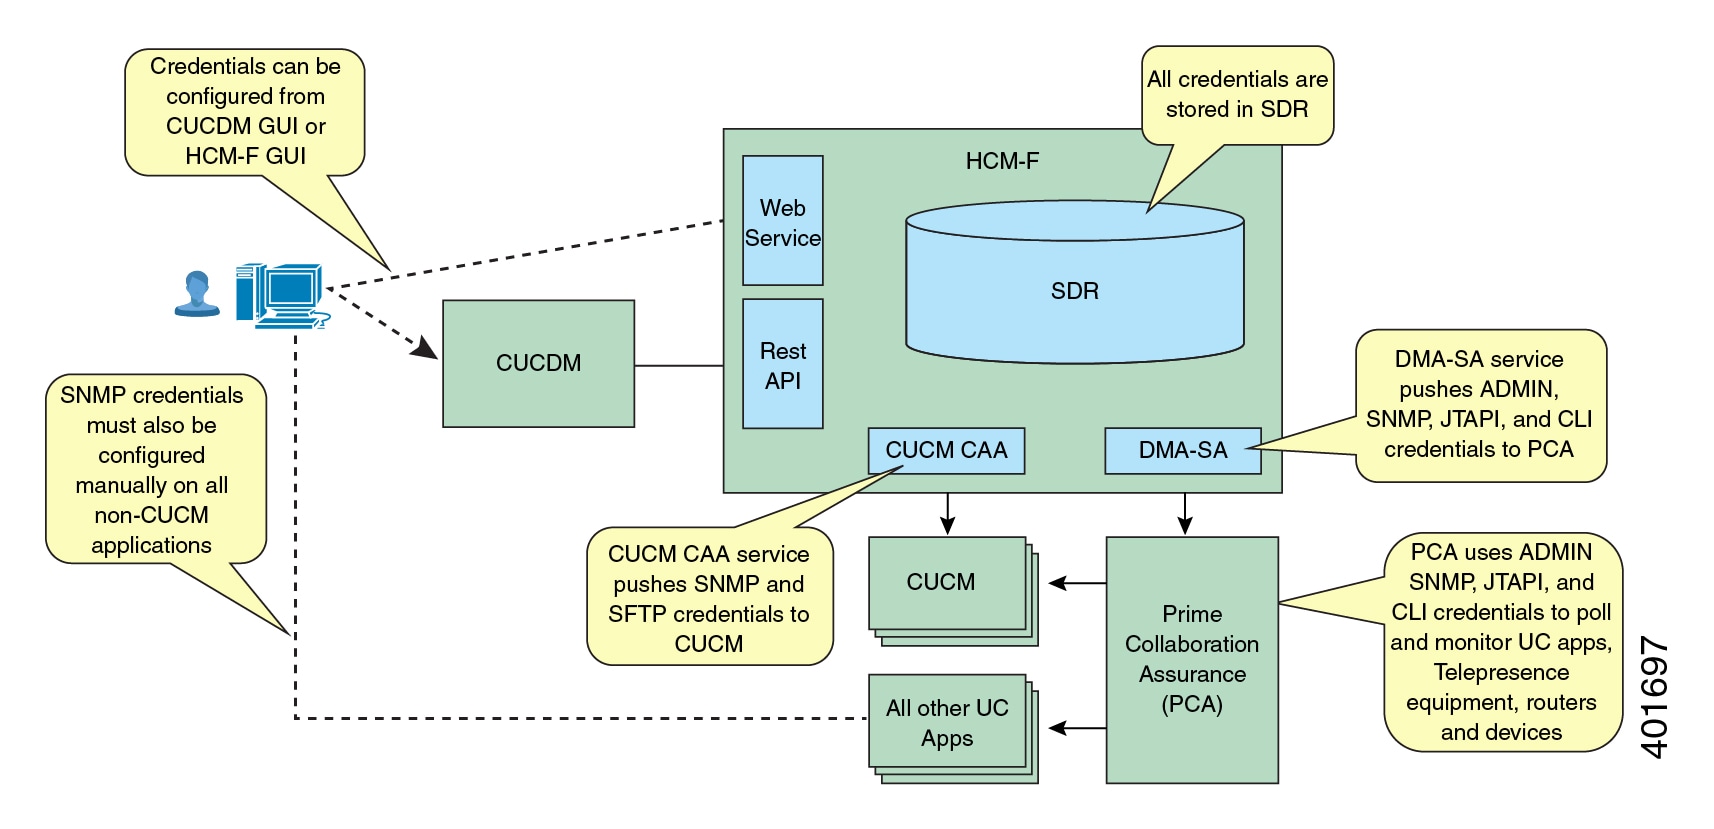 Diagram shows credentials used by hcm-f, cucdm, pca, and uc apps.